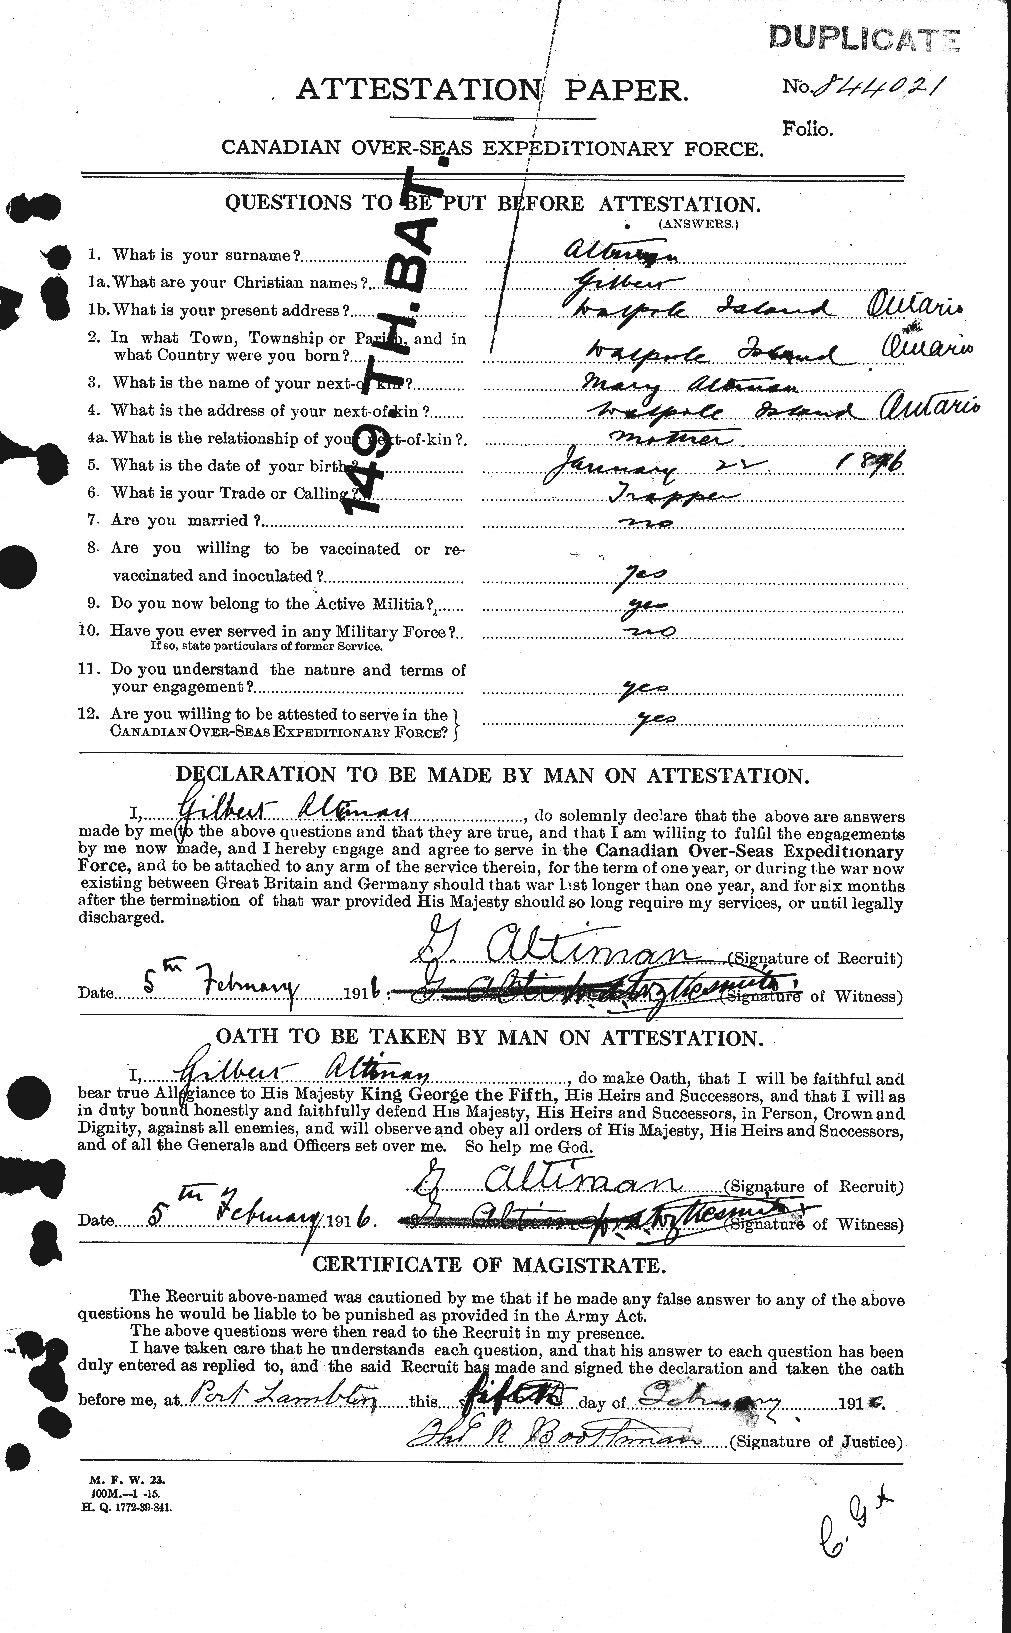 Personnel Records of the First World War - CEF 208138a